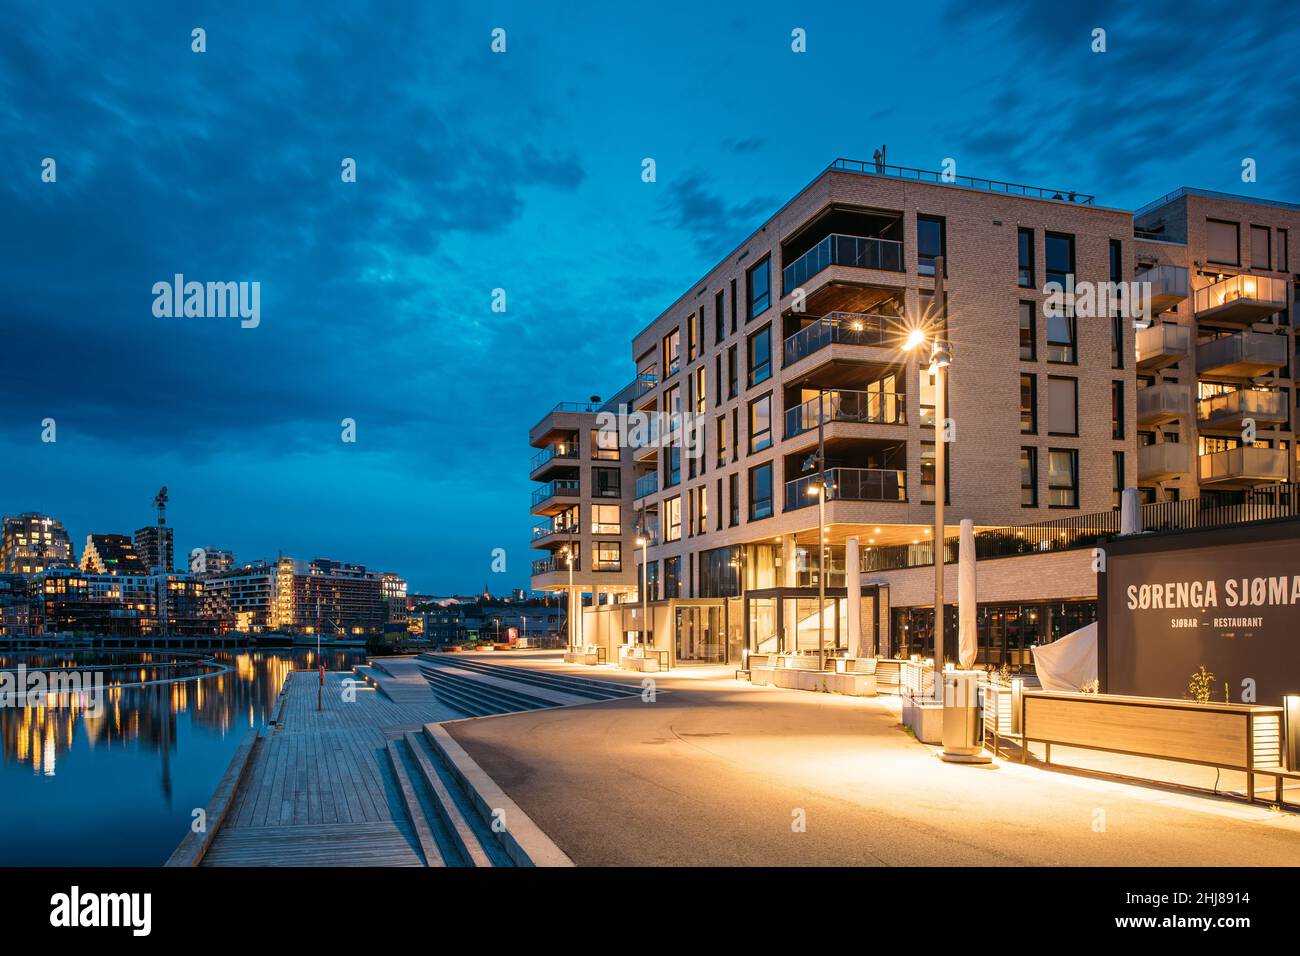 Oslo, Norway - June 25, 2019: Night View Embankment And Residential Multi-storey House On Sorengkaia Street In Gamle Oslo District. Residential Area Stock Photo